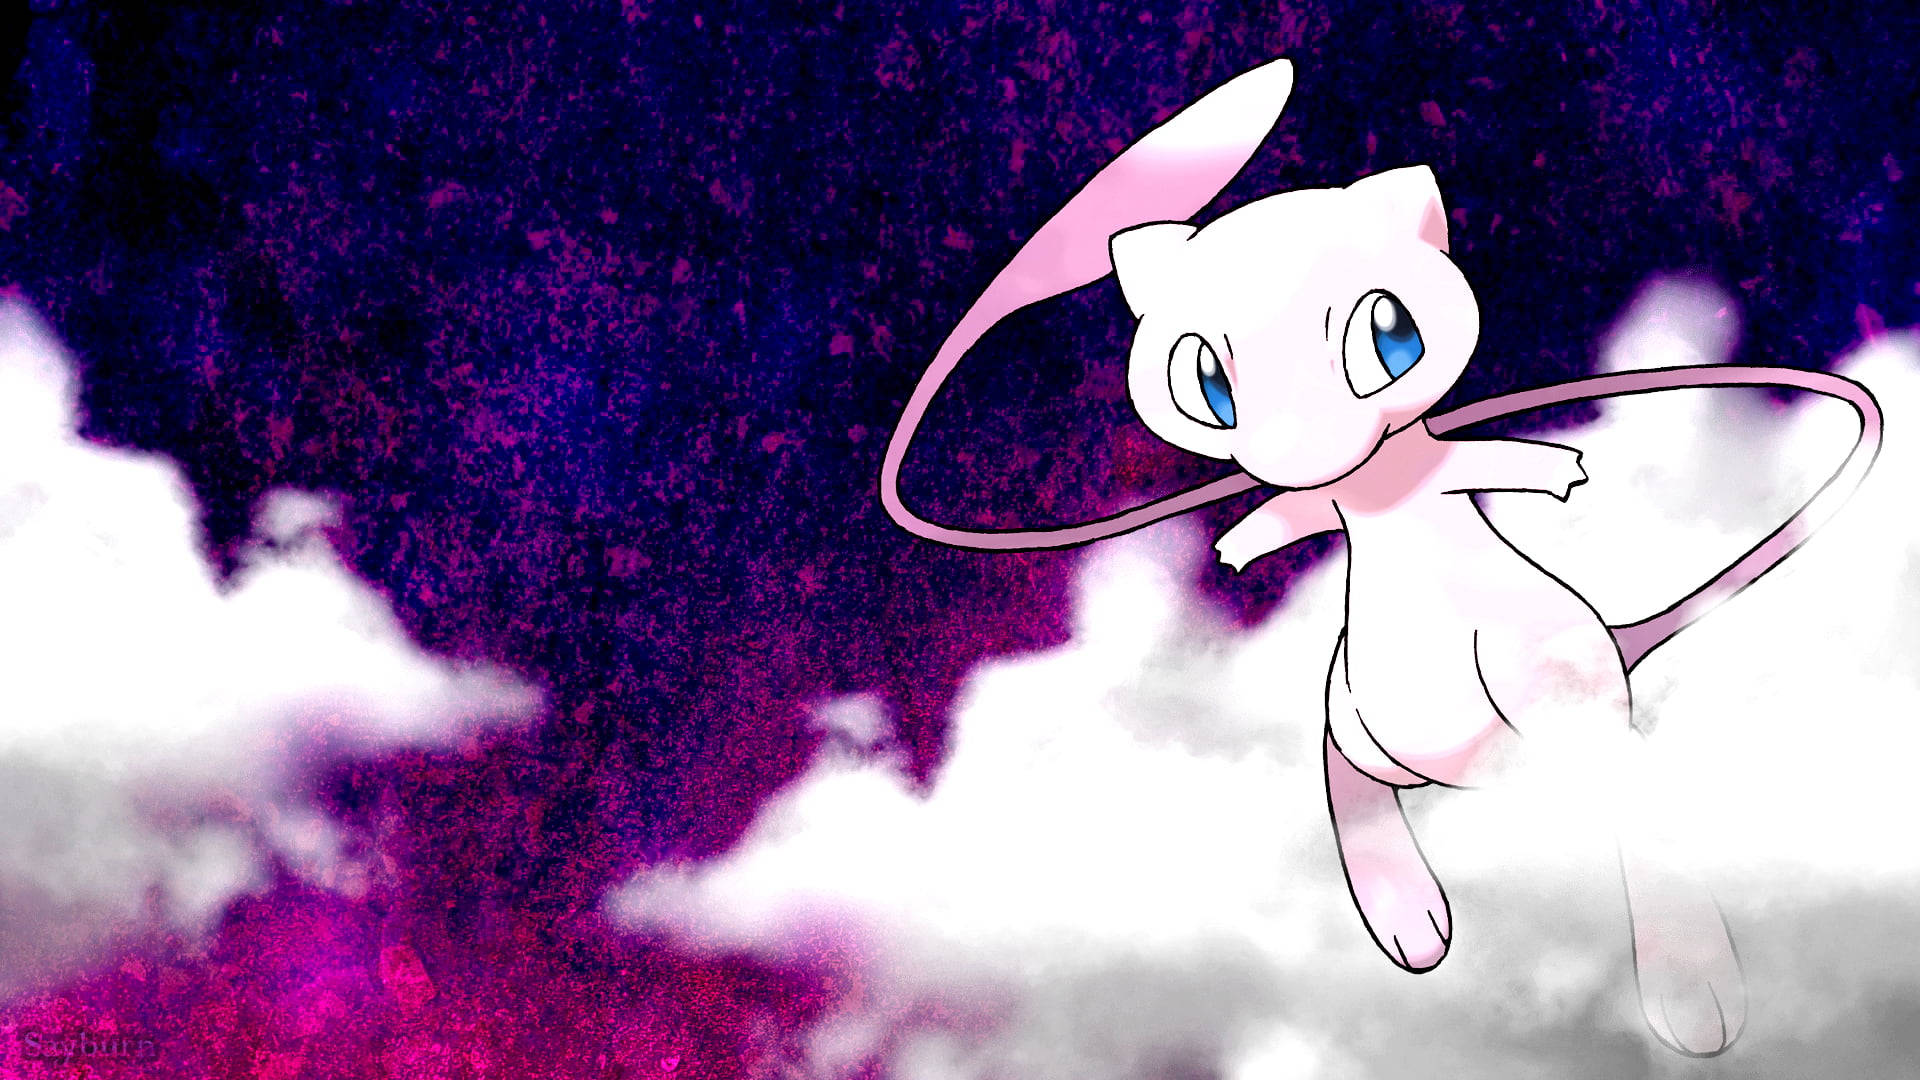 'A Creature from the Heavens: Mew in a Dreamy Cloudy Sky' Wallpaper